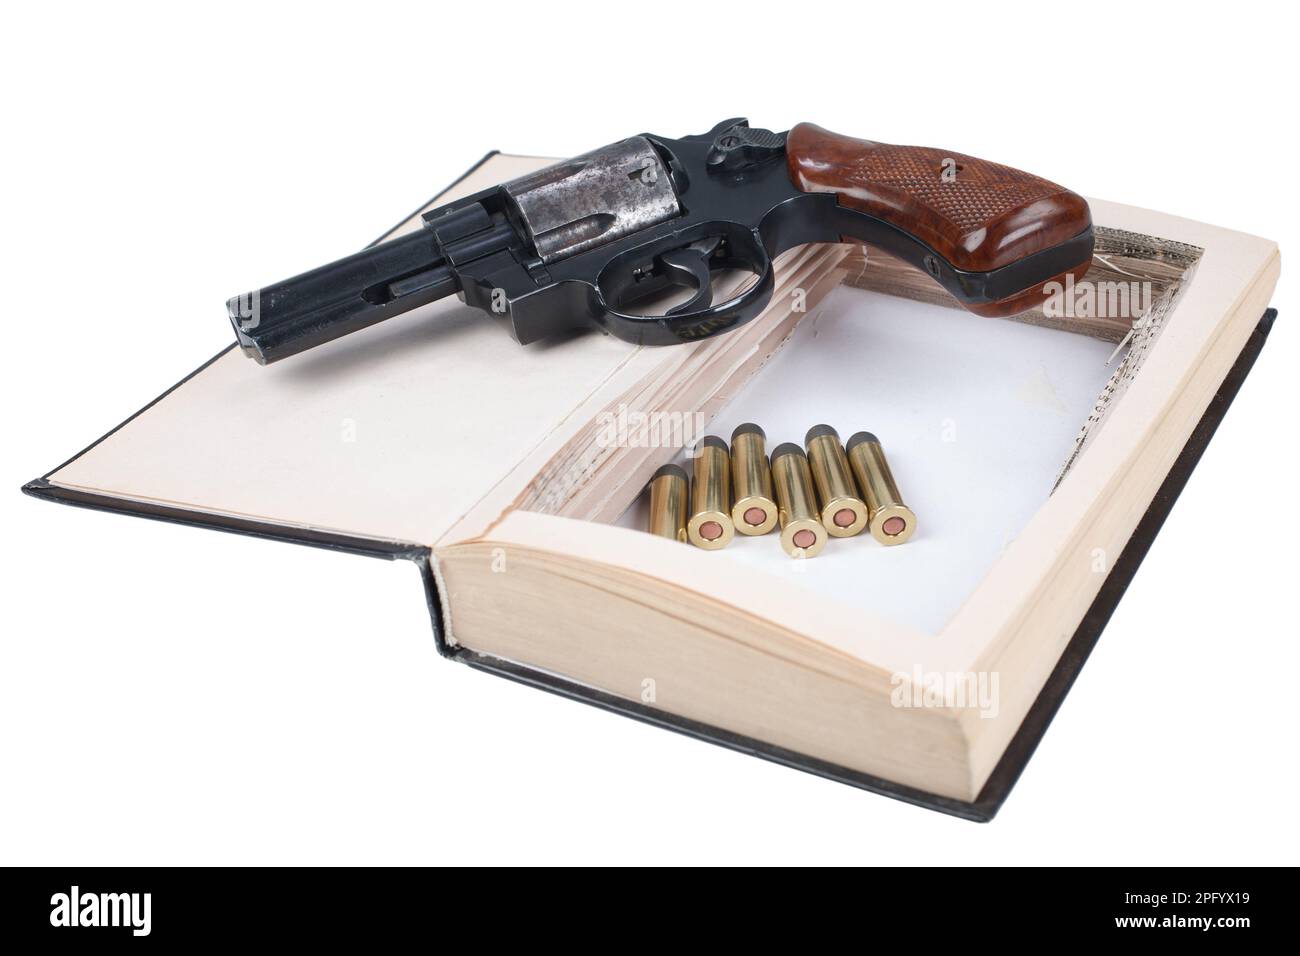 Revolver gun with cartridges hidden in a book isolated on white background Stock Photo